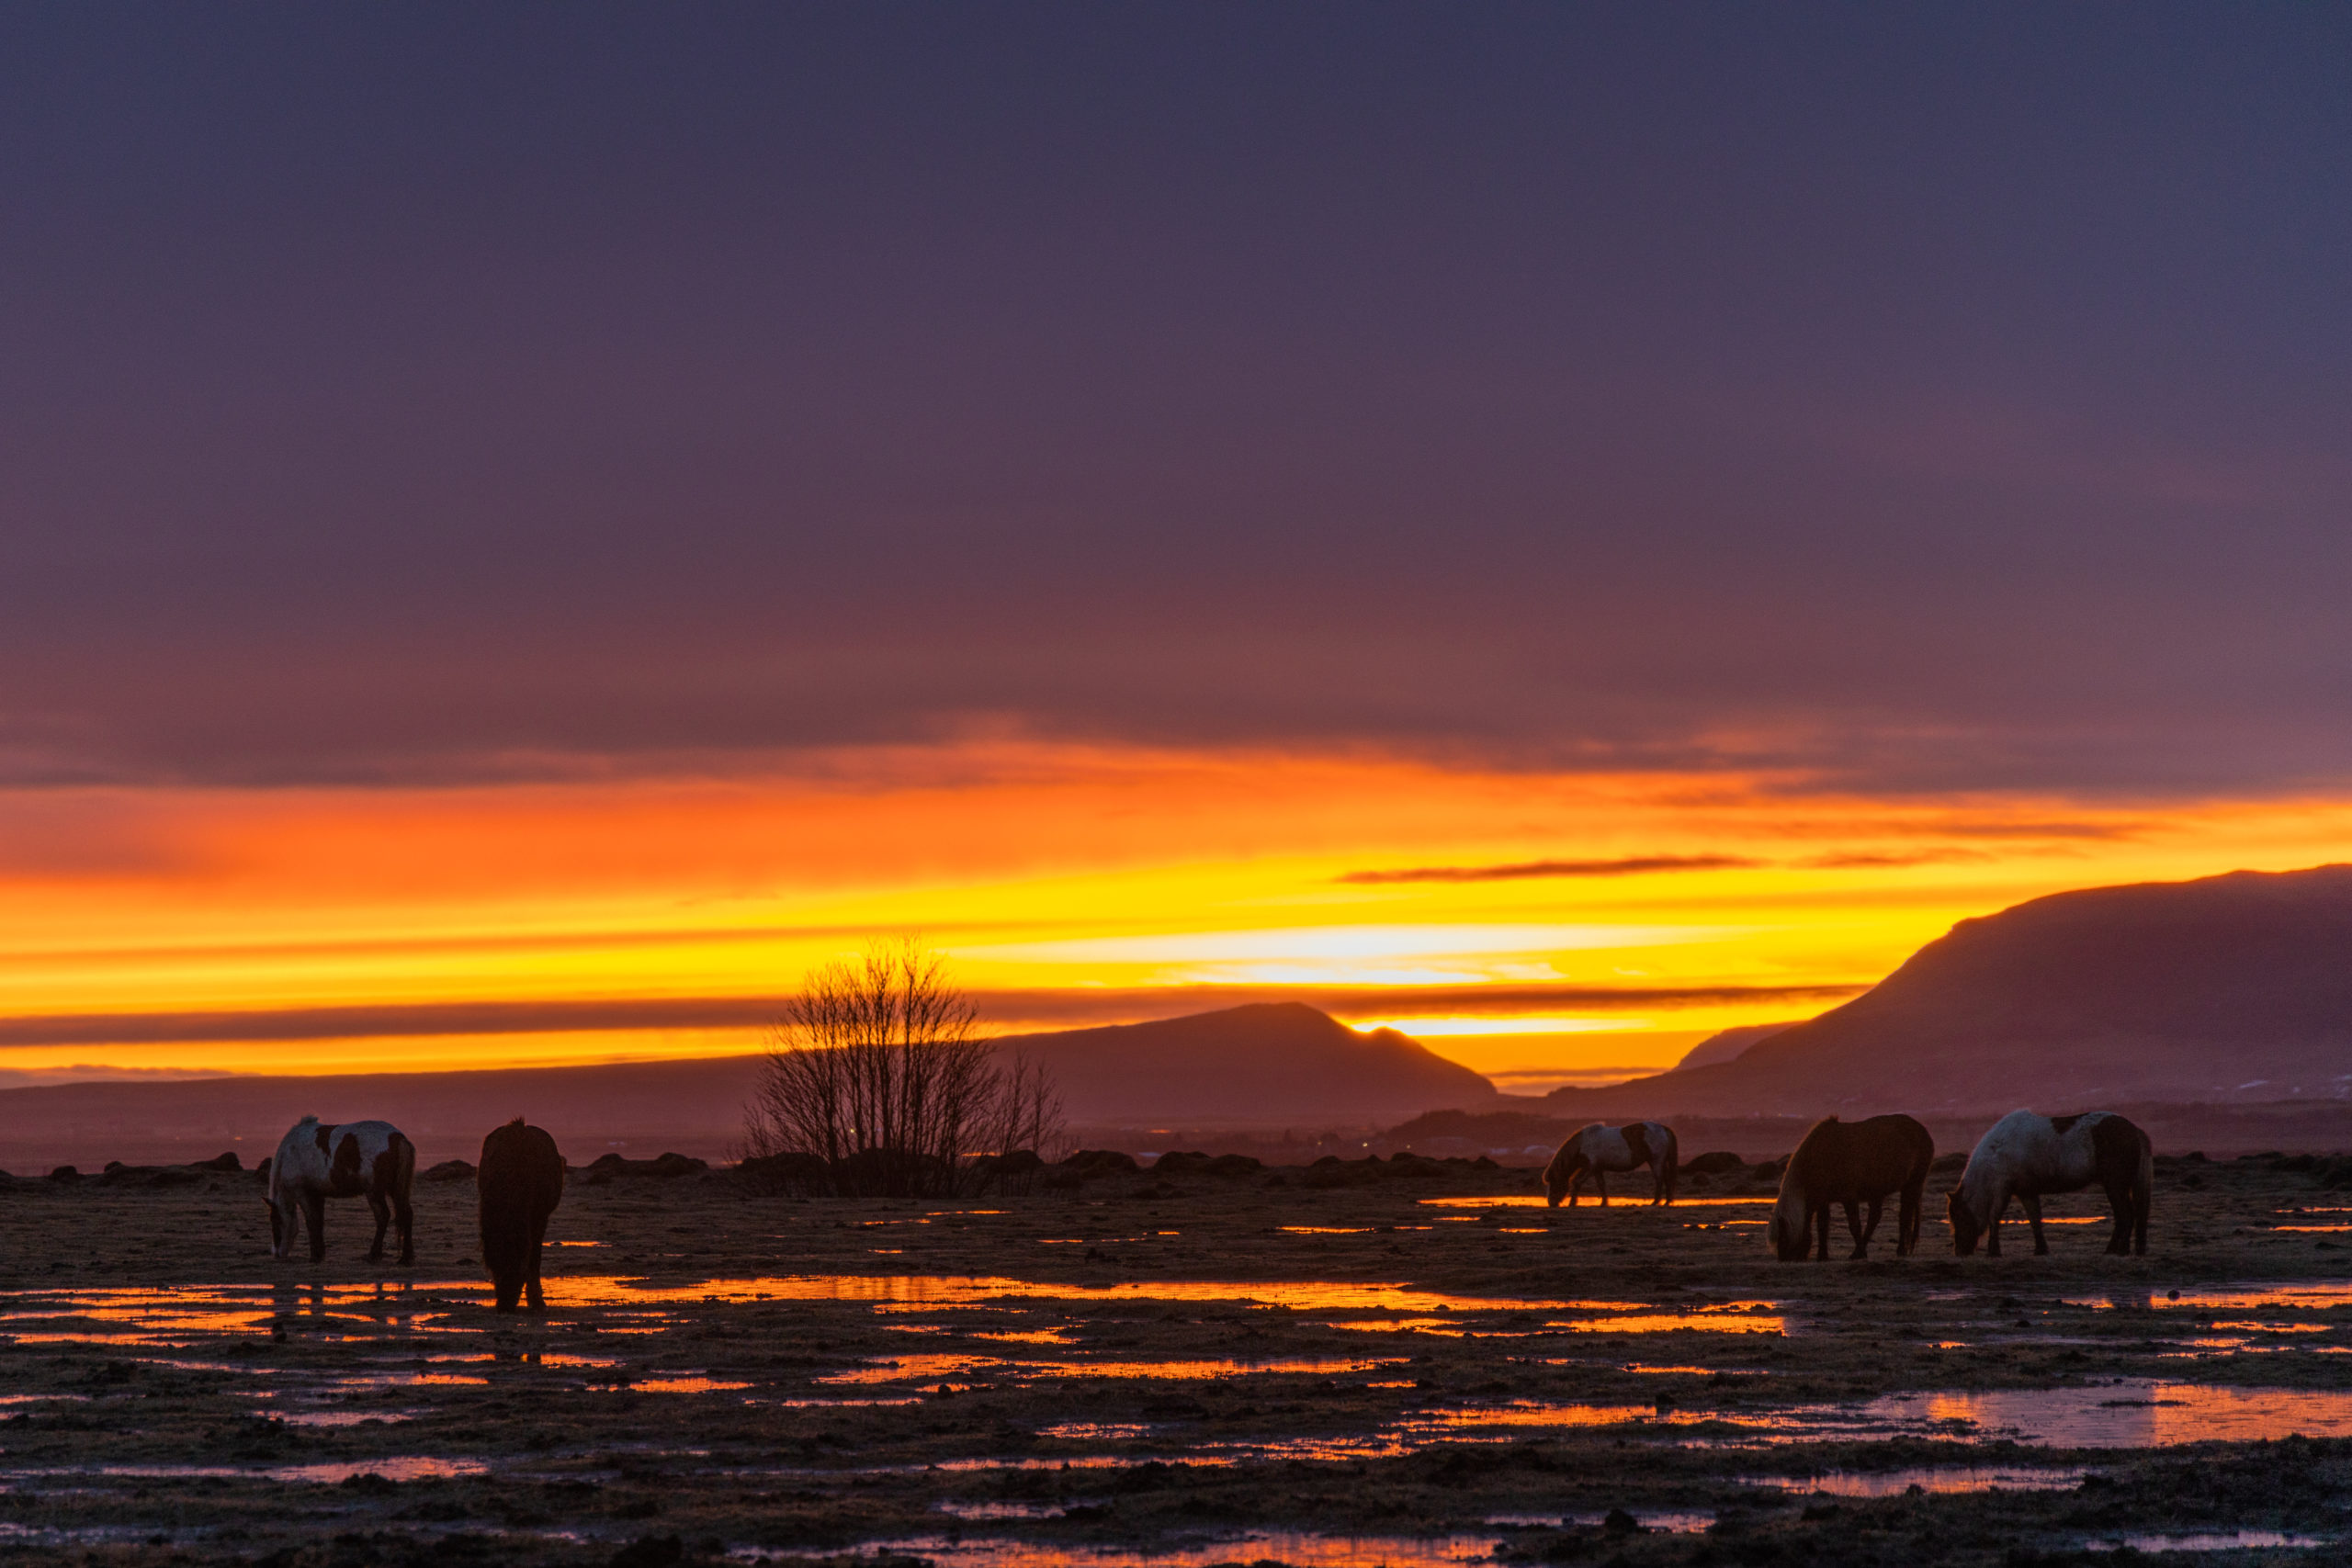 A Herd of Icelandic horses in a field during sunset